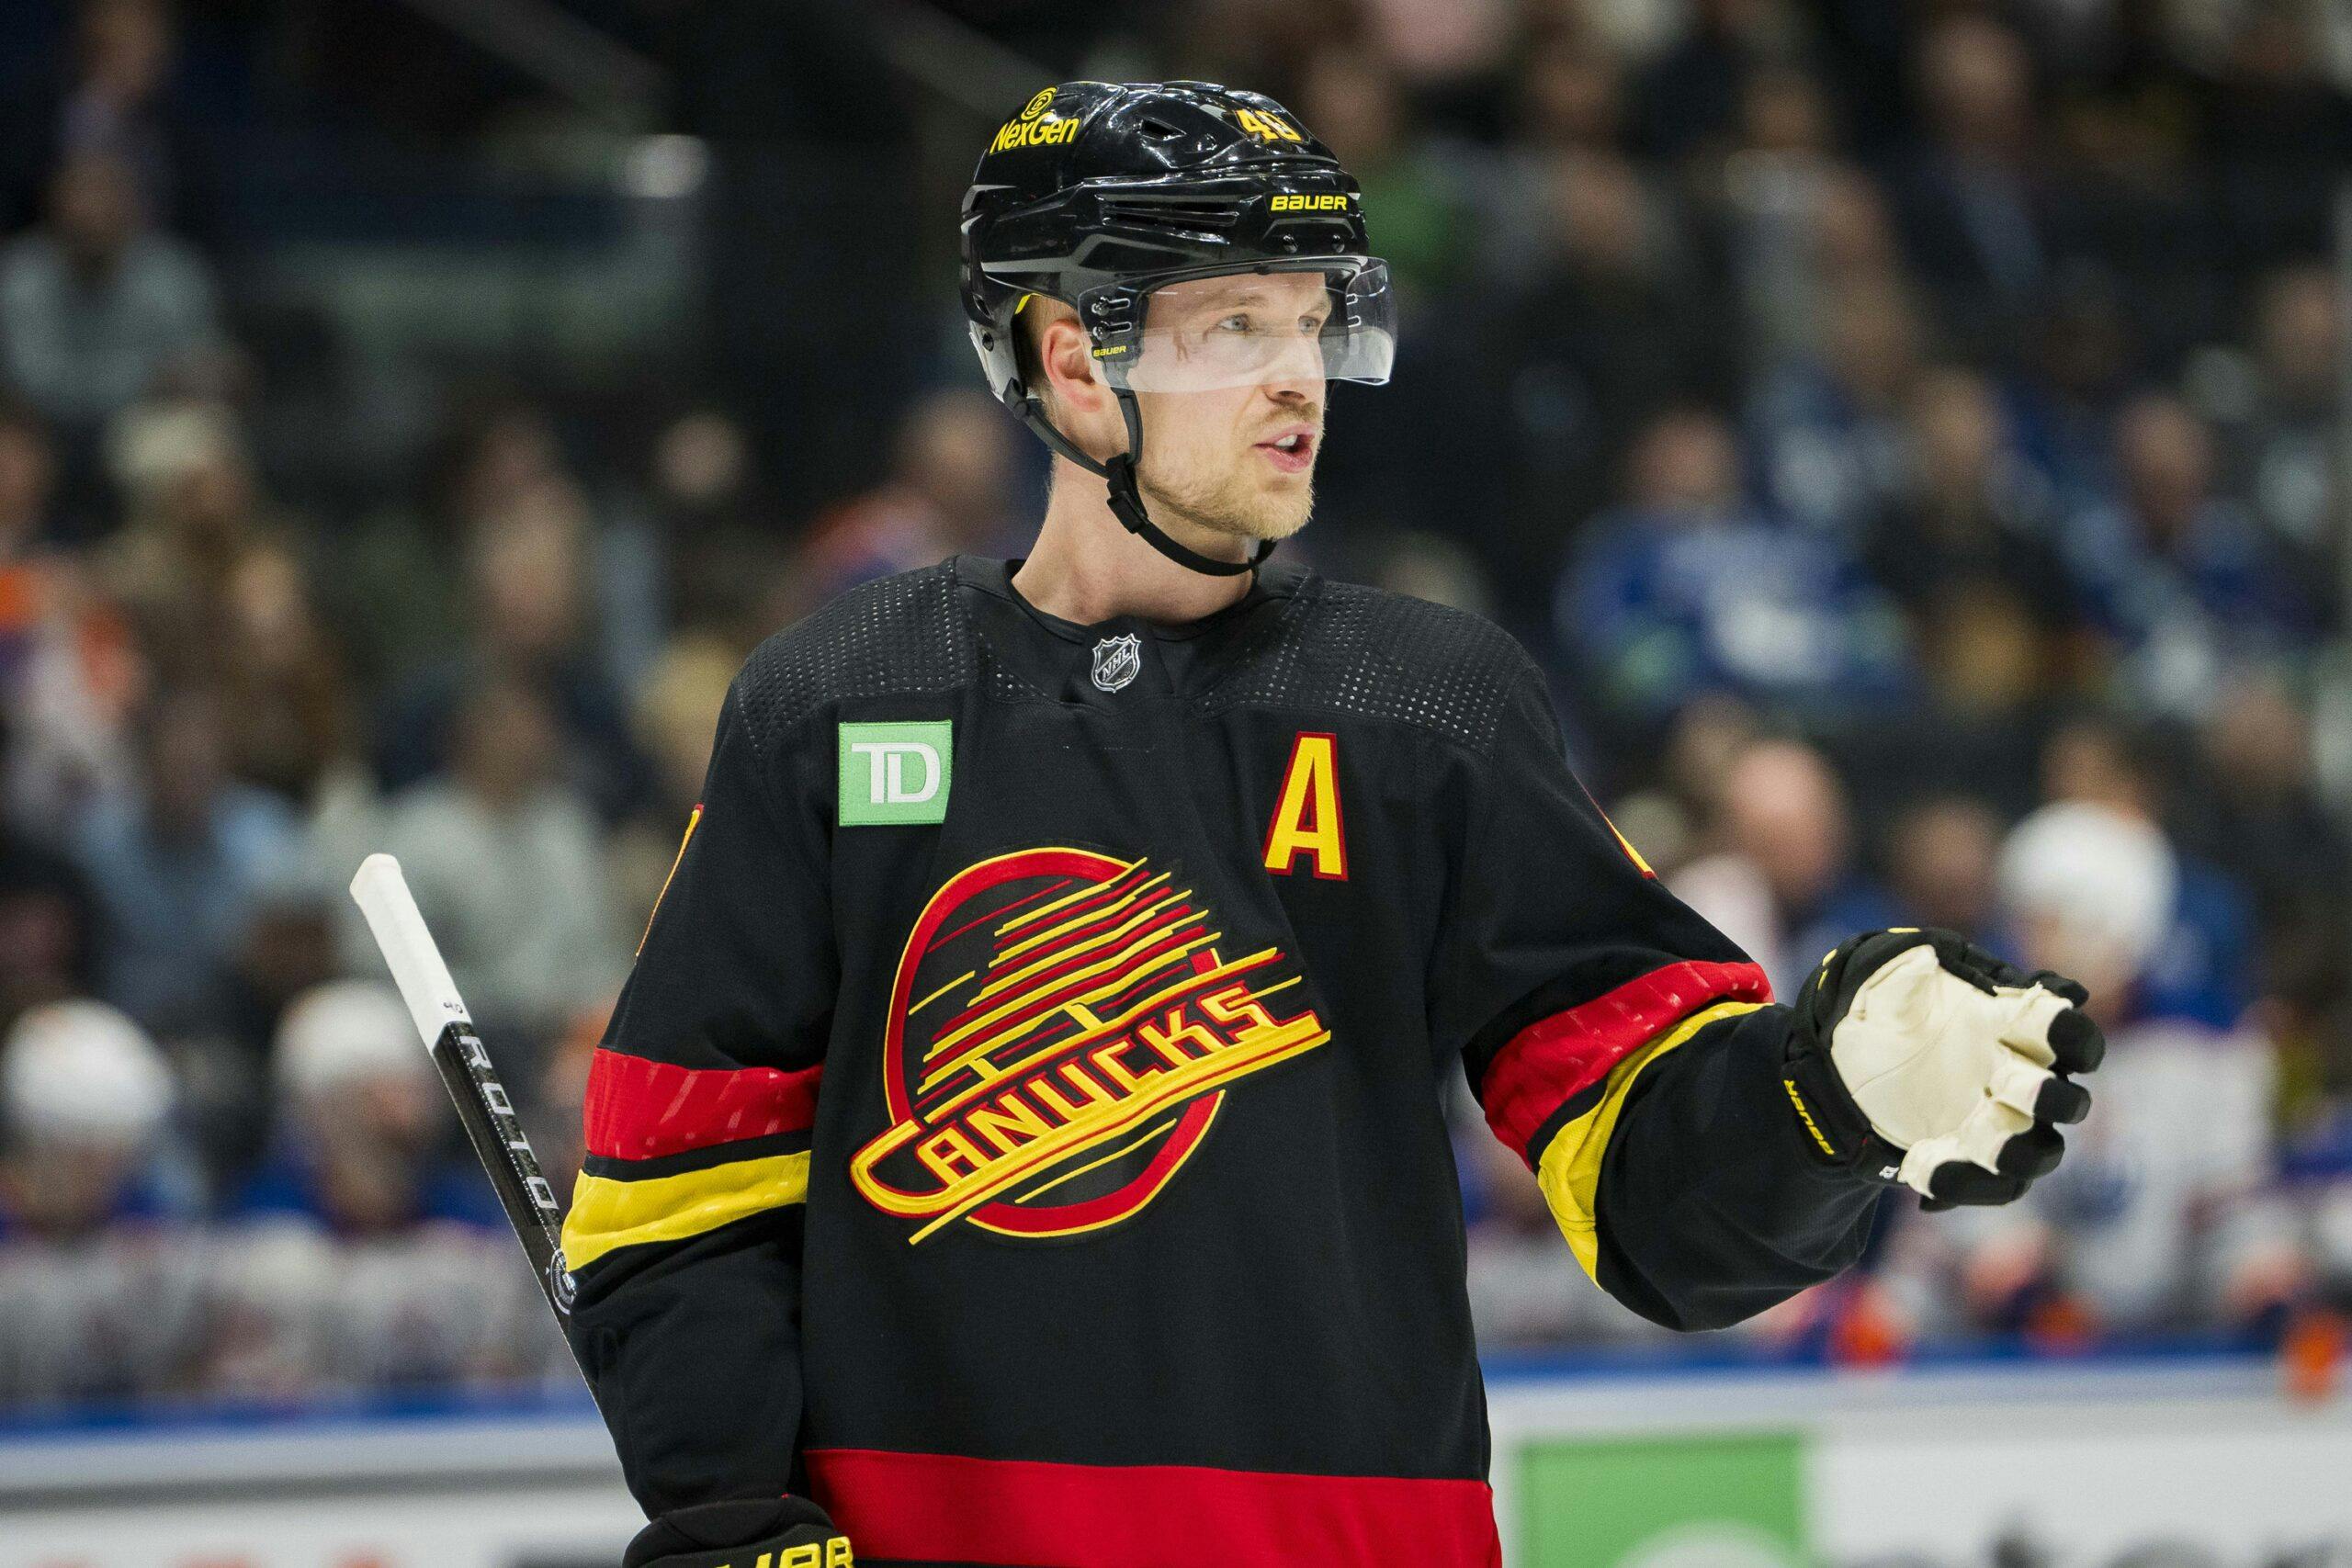 With Pettersson closing on a new deal, what will the Canucks do at the NHL Trade Deadline?